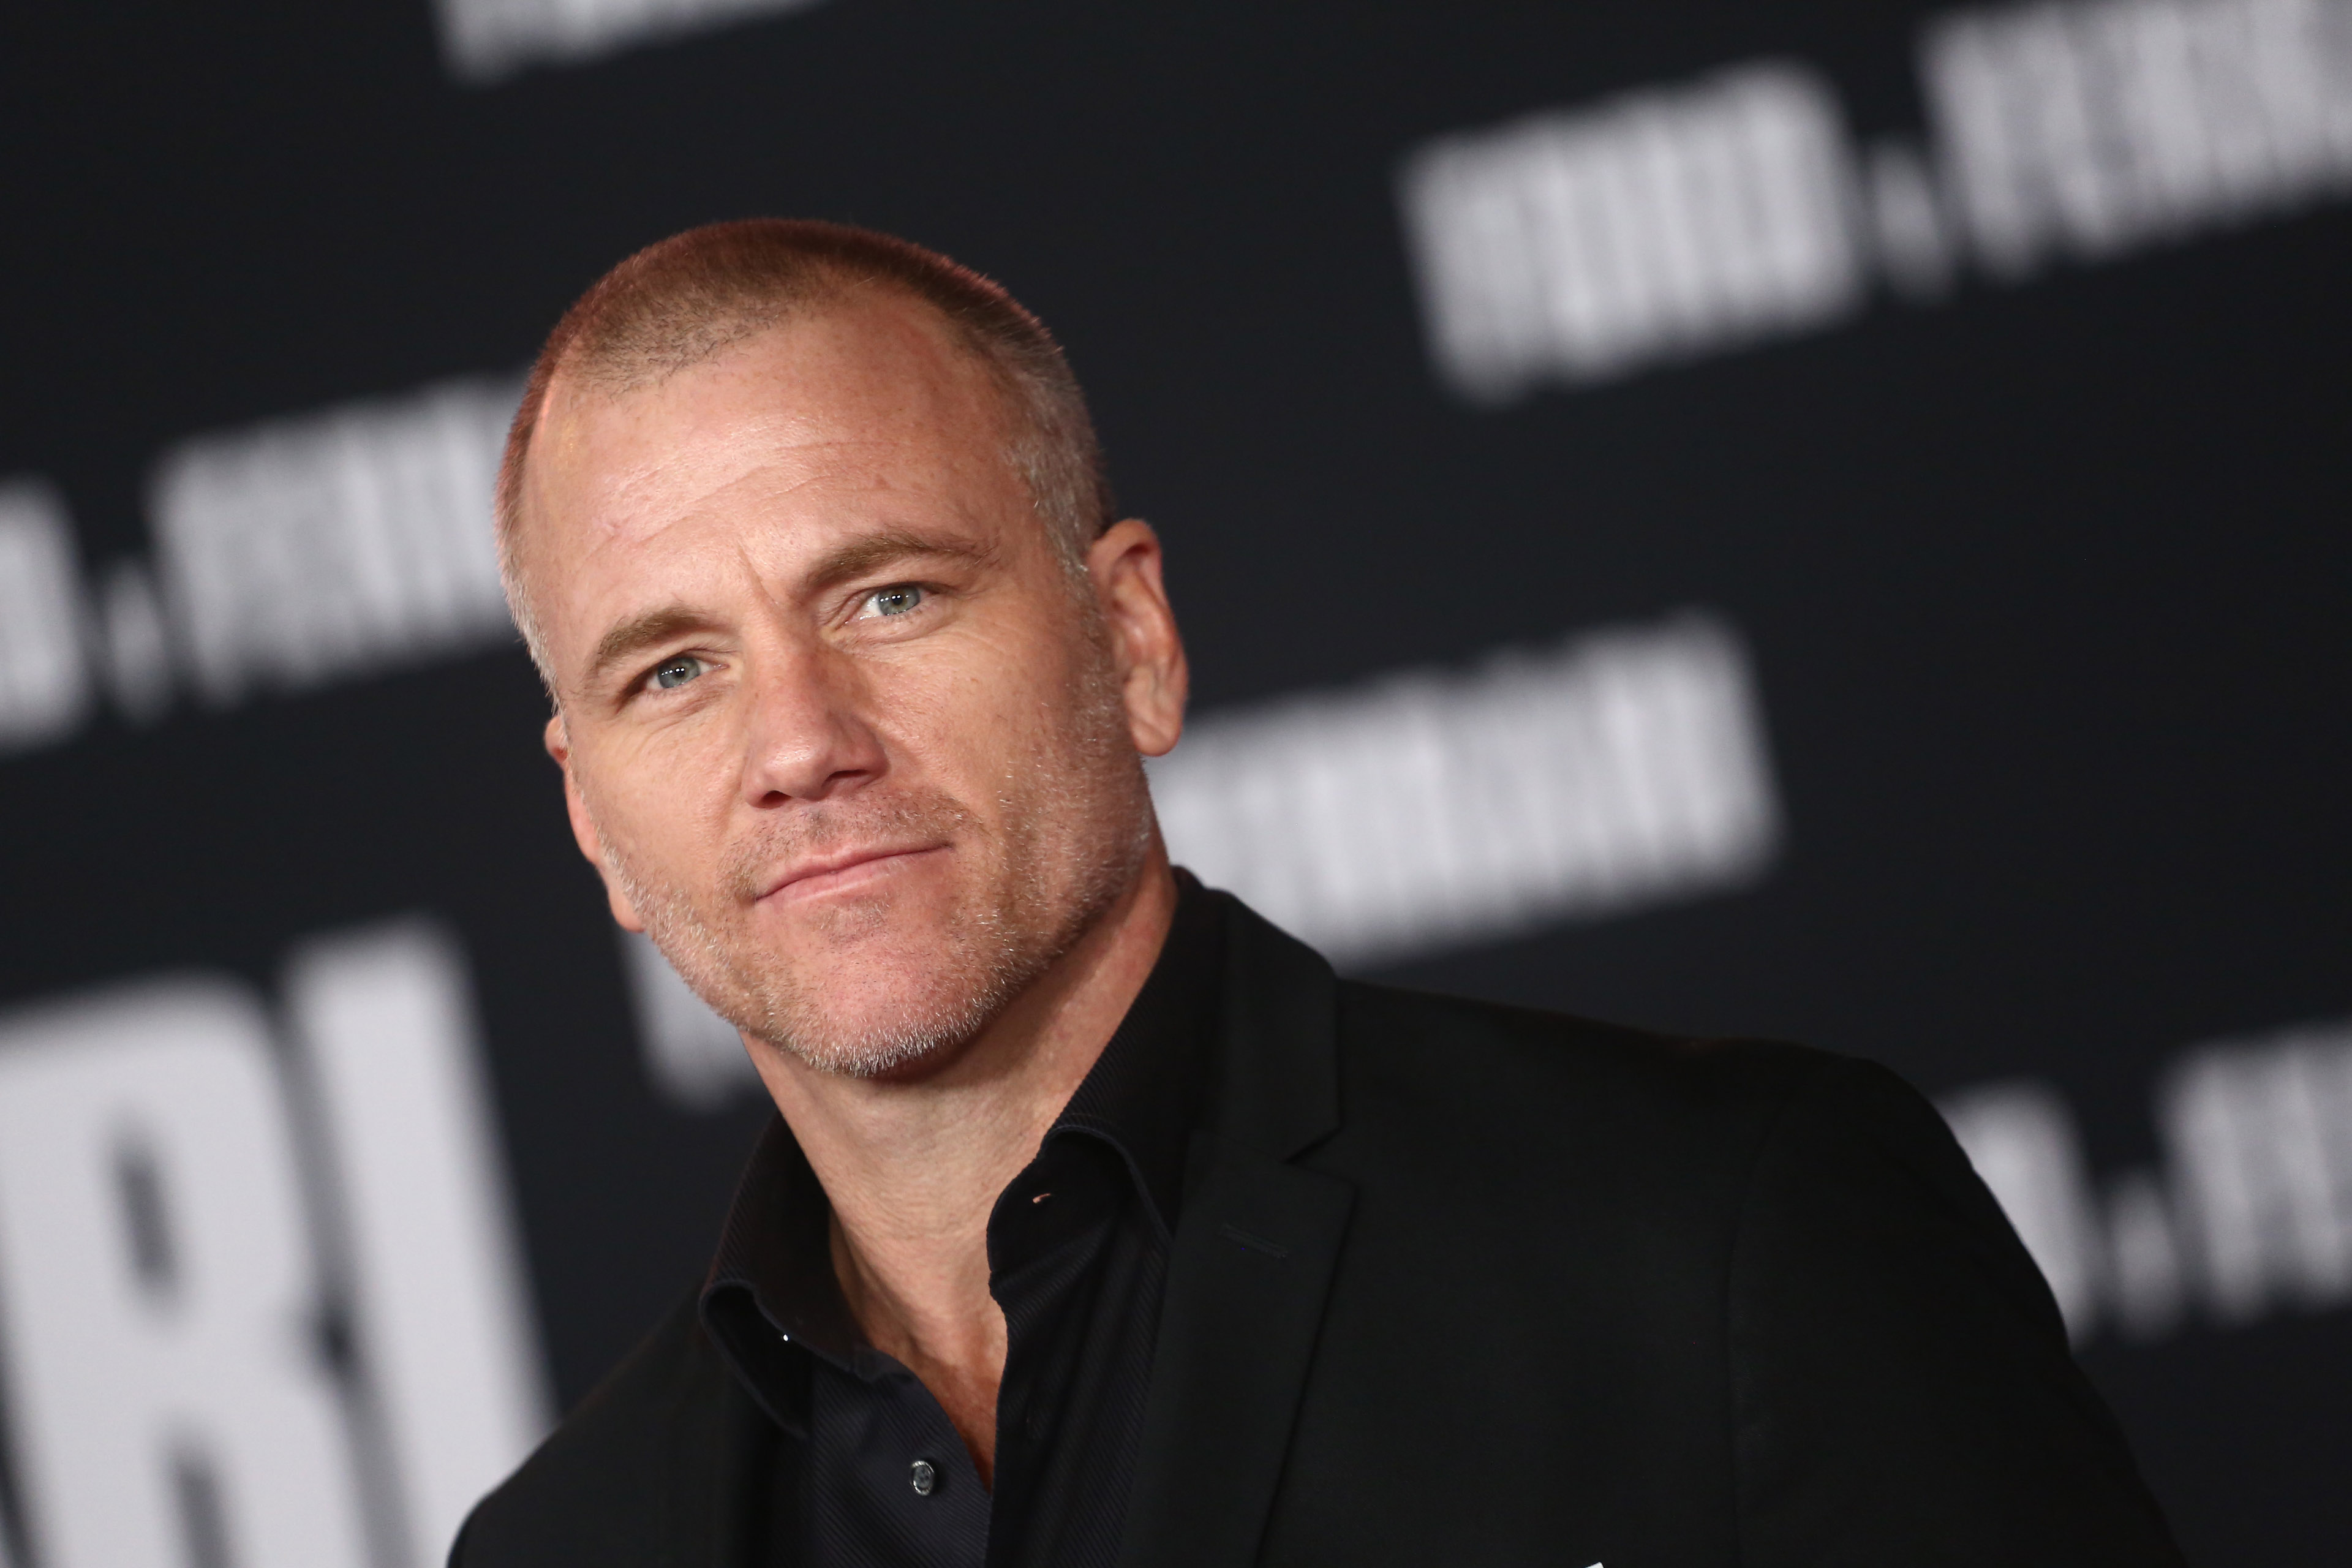 'The Young and the Restless' actor Sean Carrigan wearing a black suit during a red carpet appearance.